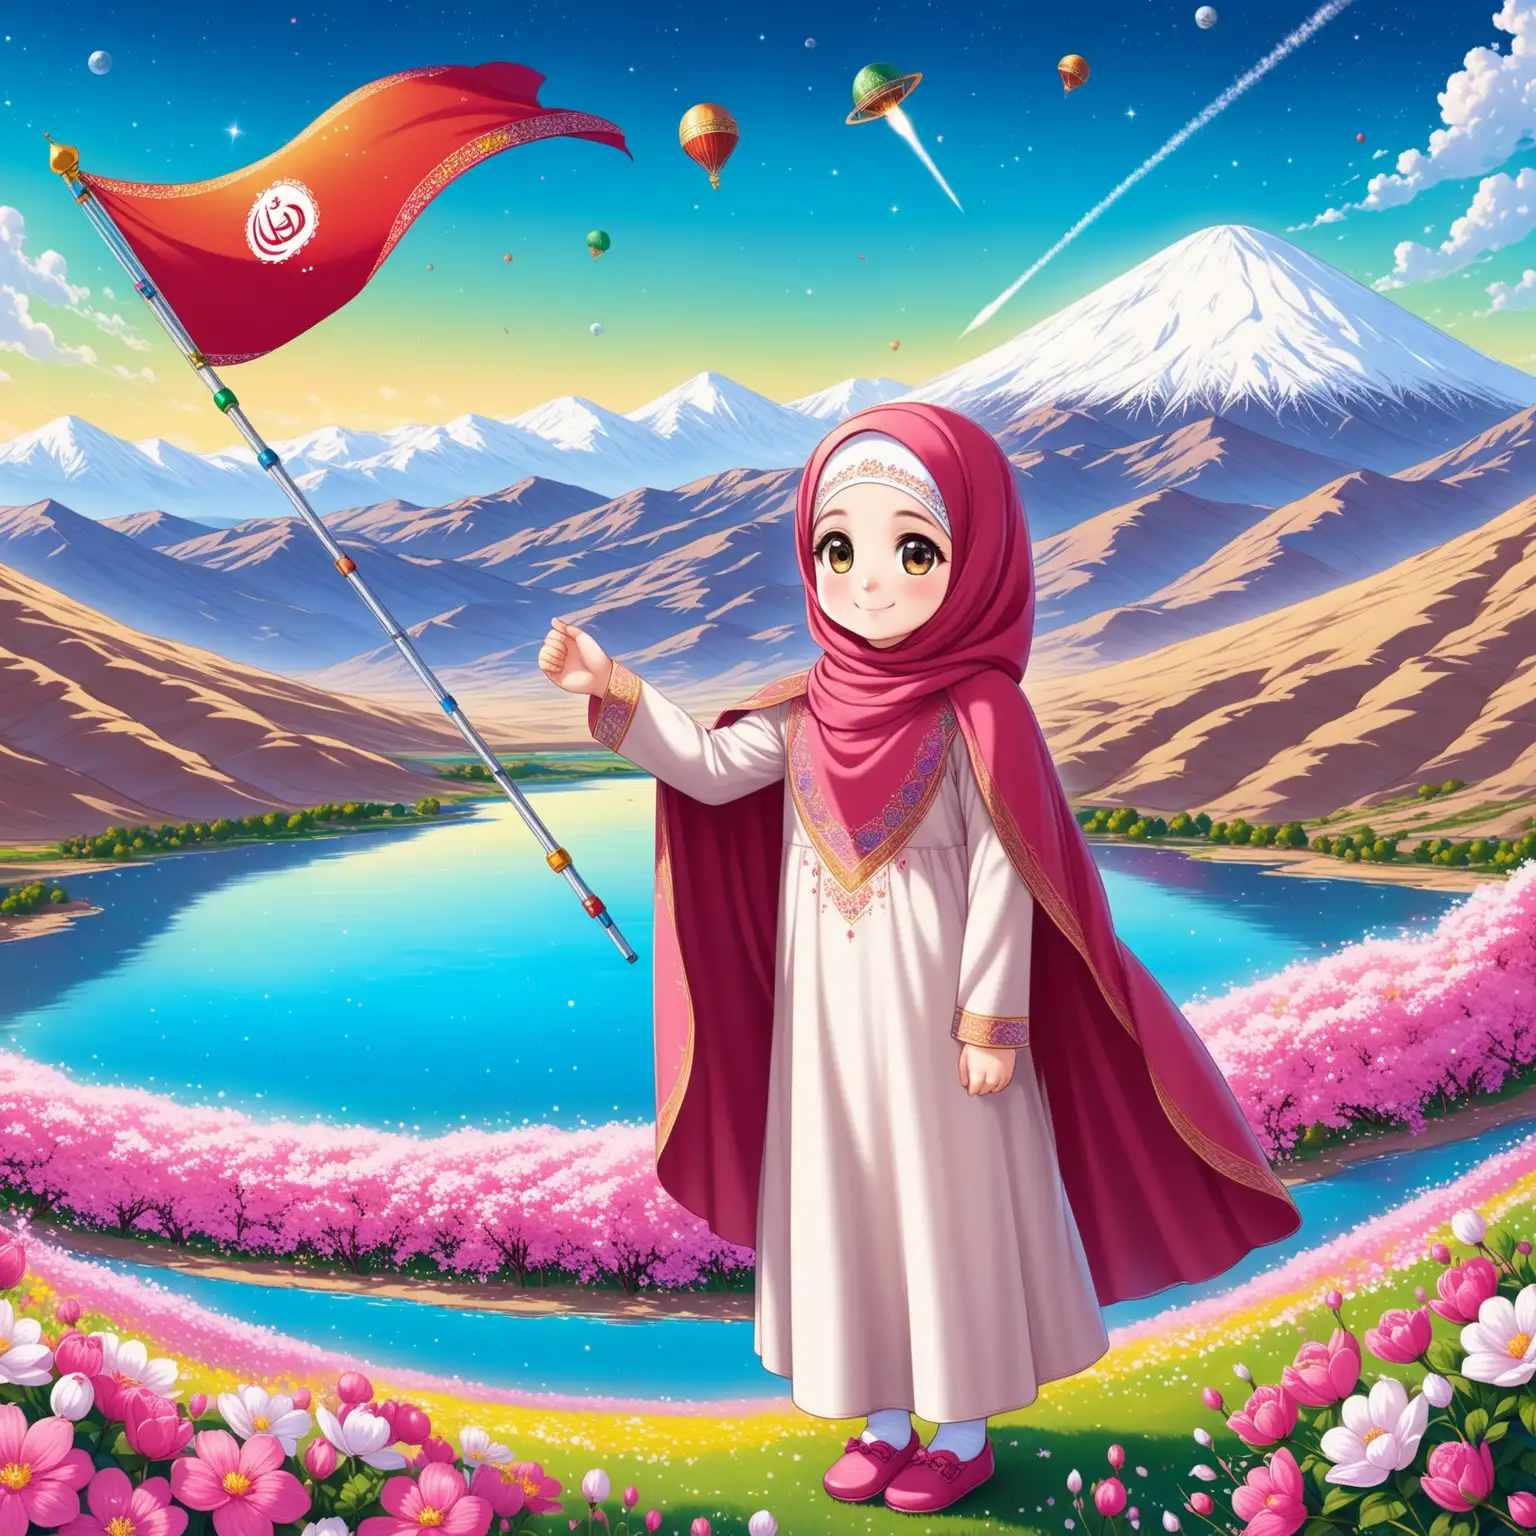 Persian little girl(full height, Muslim, with emphasis no hair out of veil(Hijab), small eyes, bigger nose, white skin, cute, smiling, wearing socks, clothes full of Persian designs).
Atmosphere Damavand mountain, nice flag of Iran raised with honor, satellites in sky,  firing satellite to sky and full of many pink flowers, lake, spring.